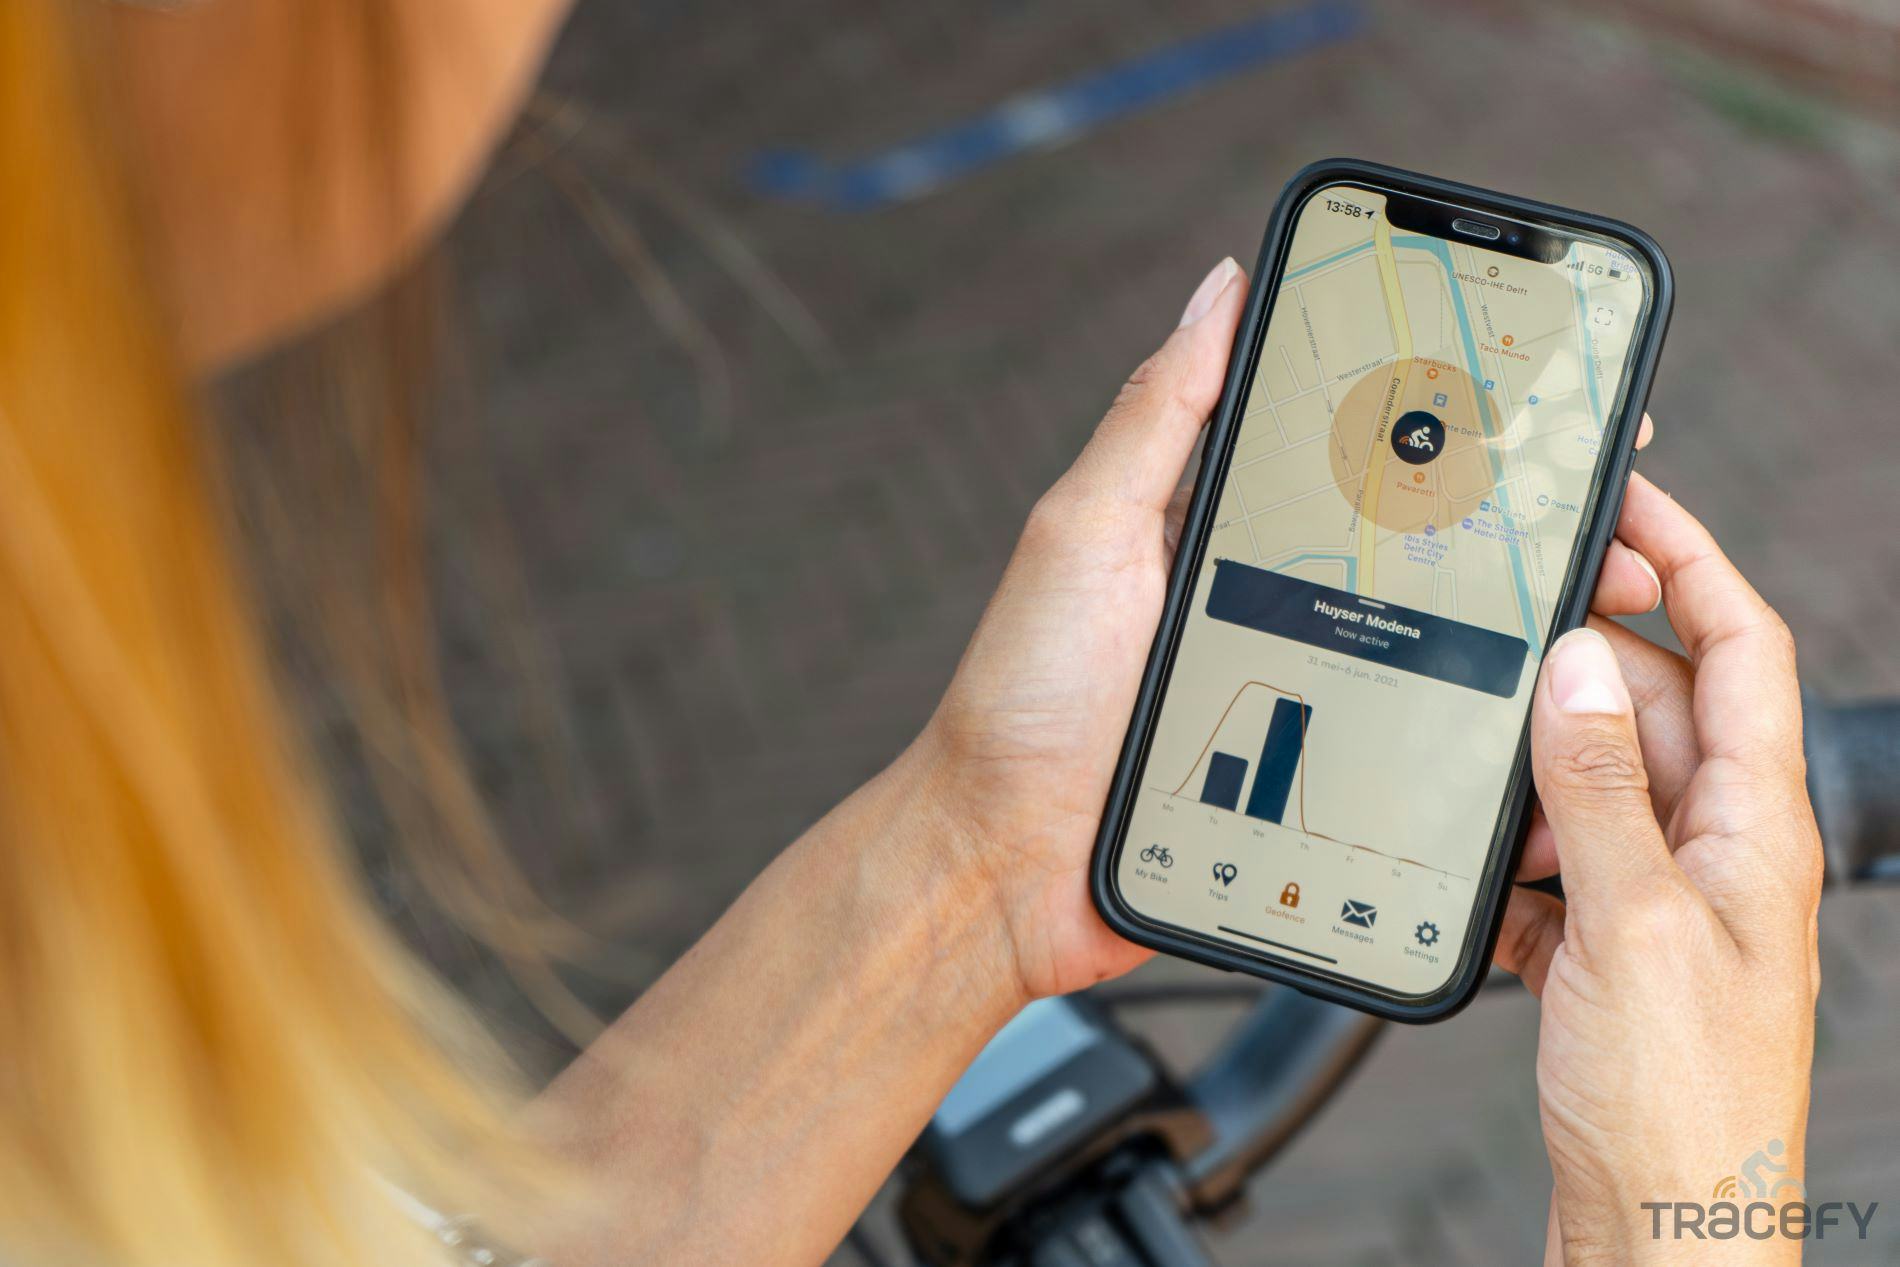 More: Connect & Go tracking system for e-bike manufacturers